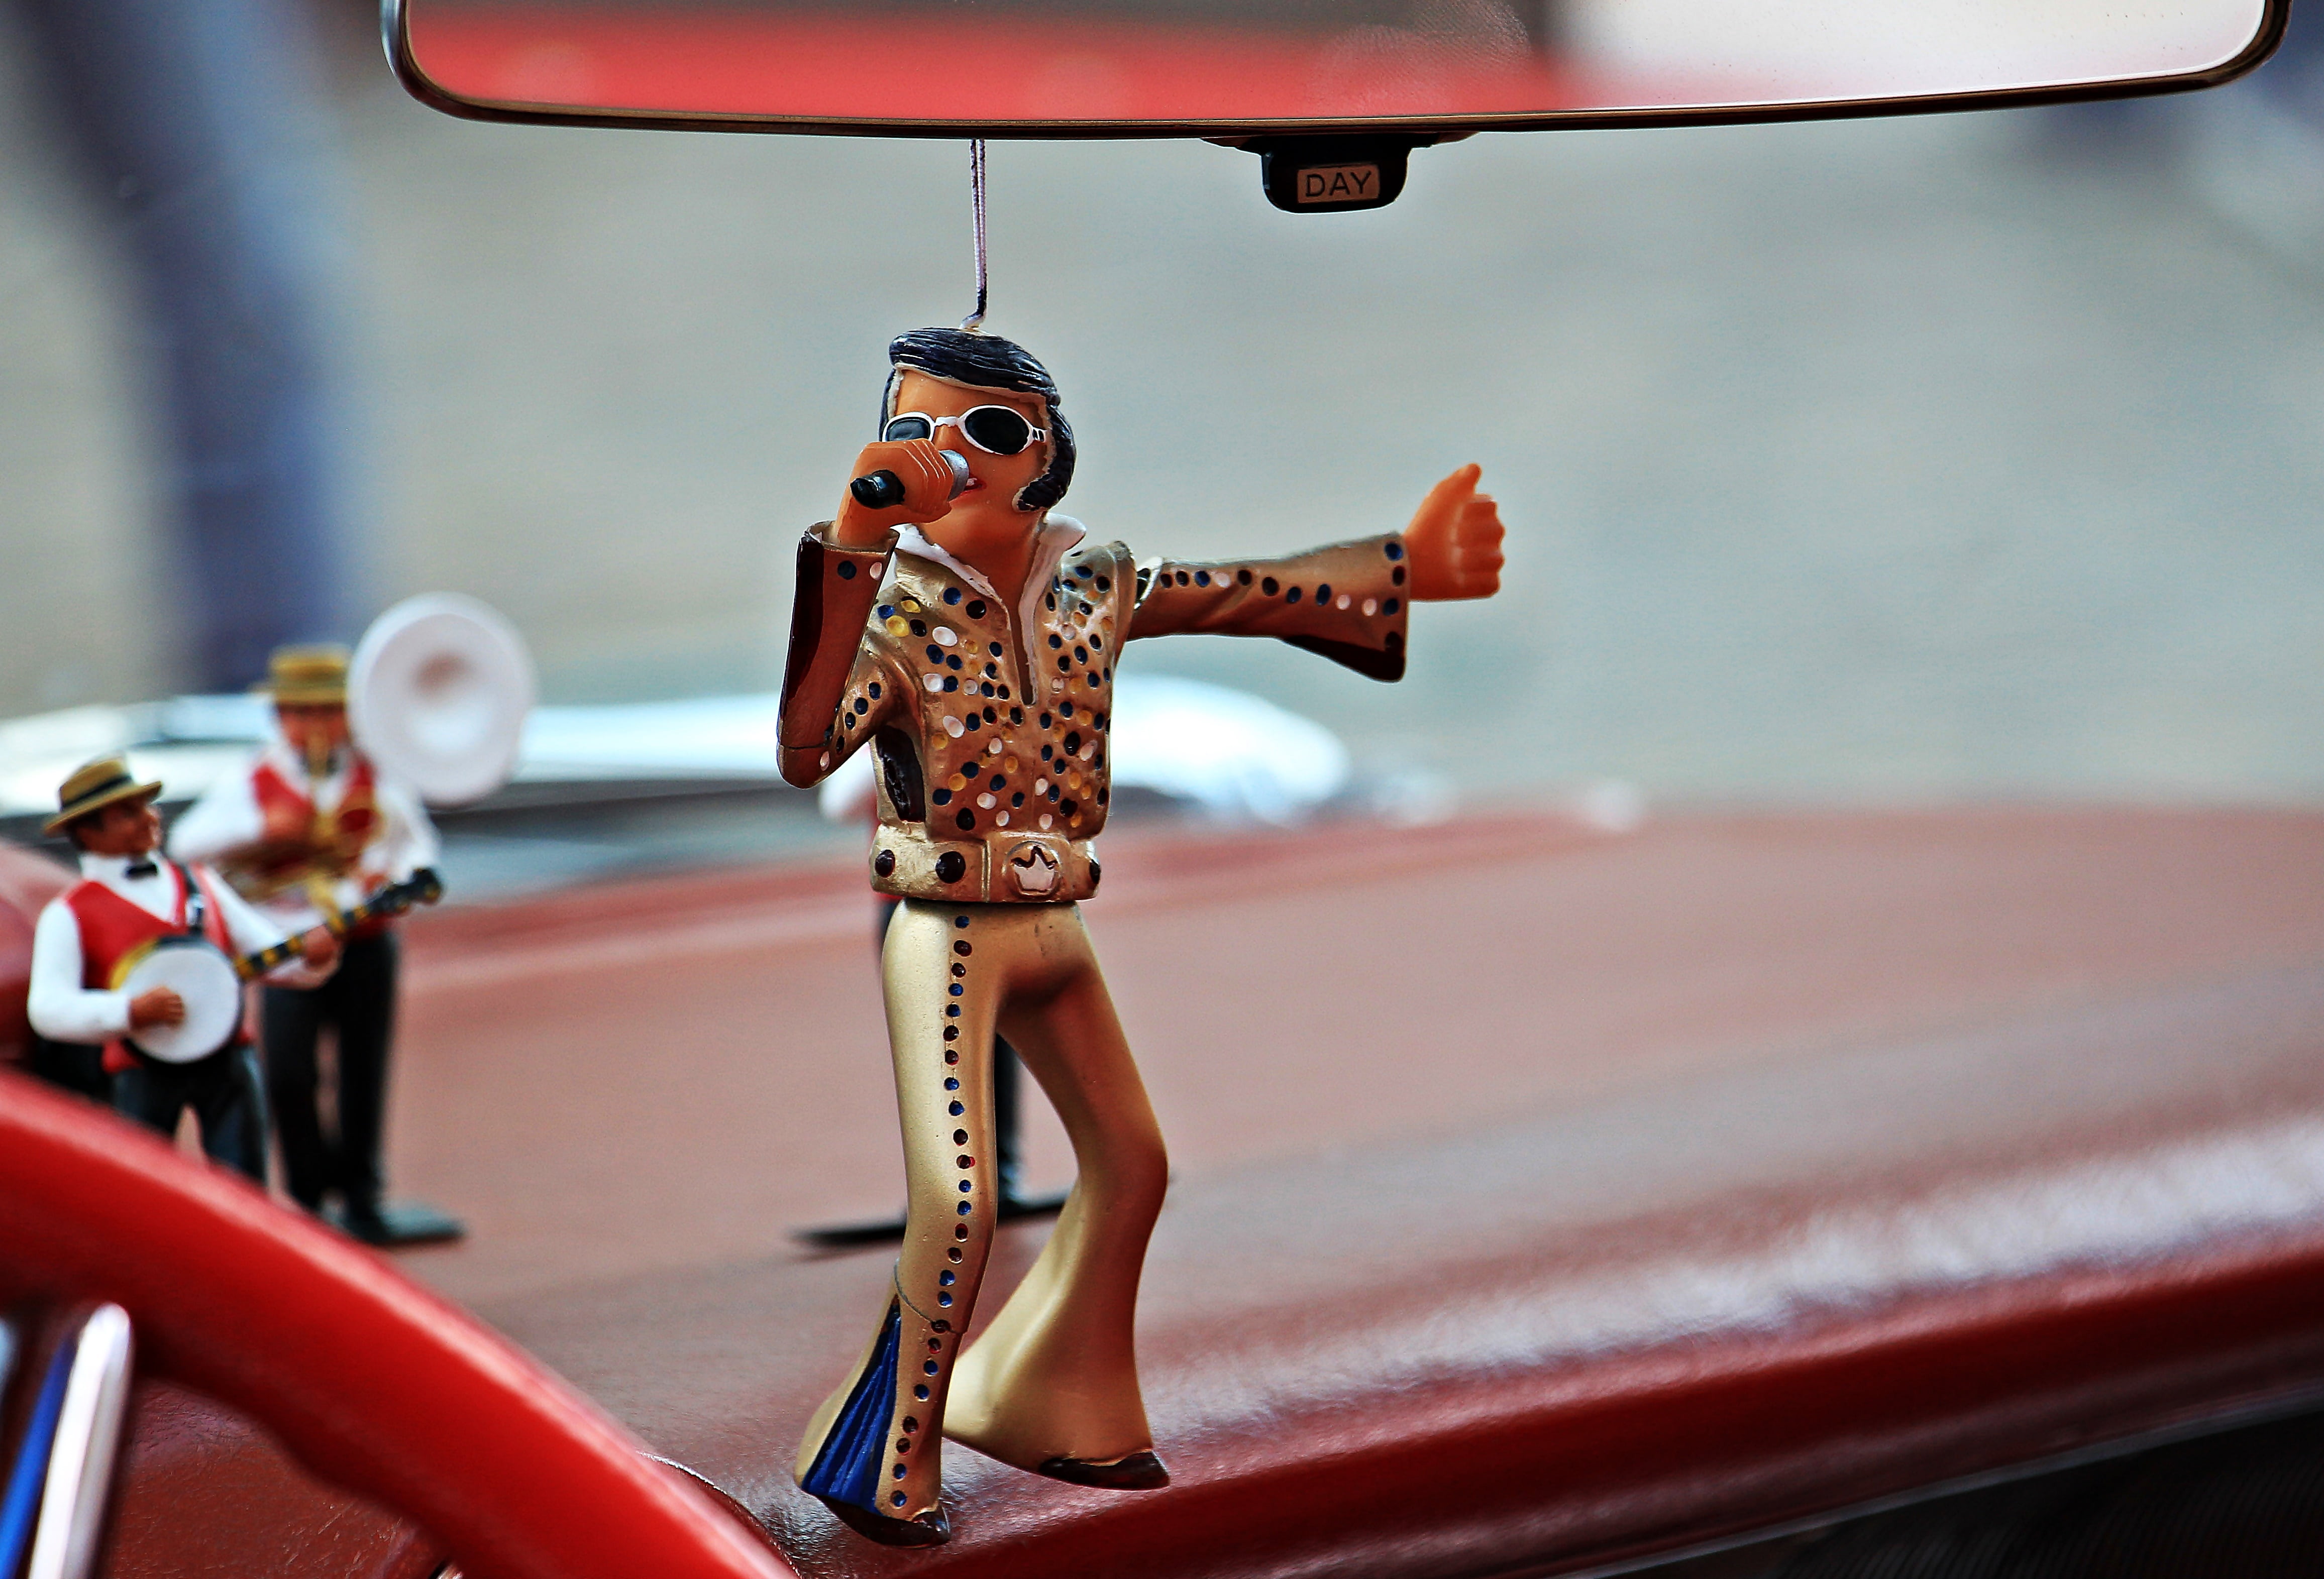 selective focus photography of Elvis Presley ornament hanging on rear view mirror